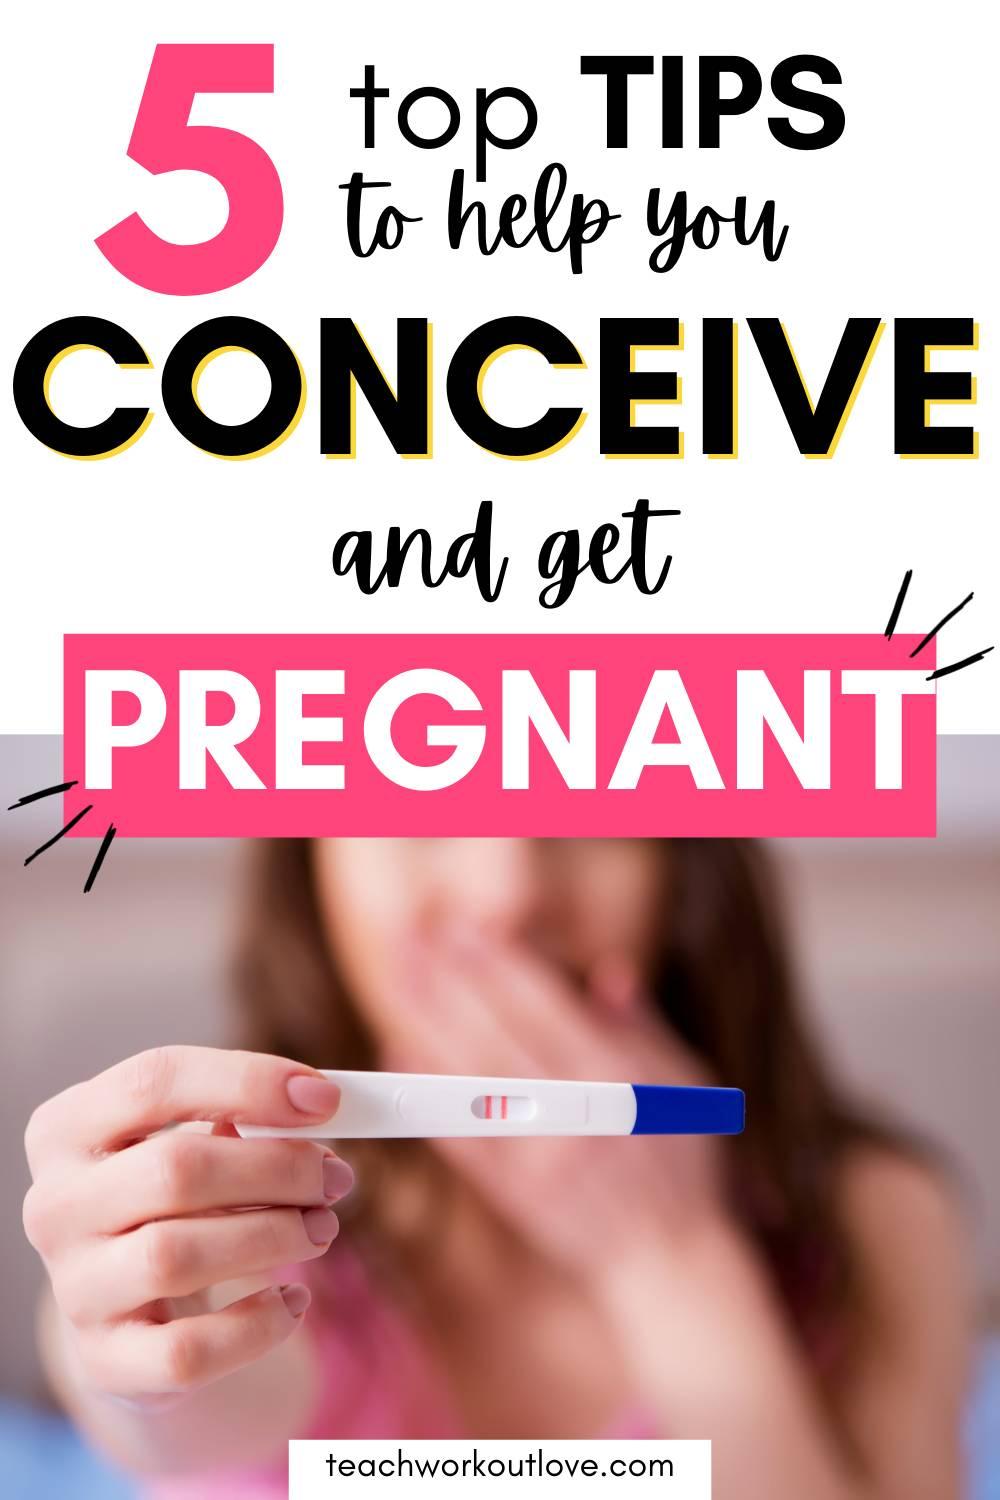 There's no guarantee that a woman will become pregnant quickly. Here's several necessary steps to take when trying to conceive.